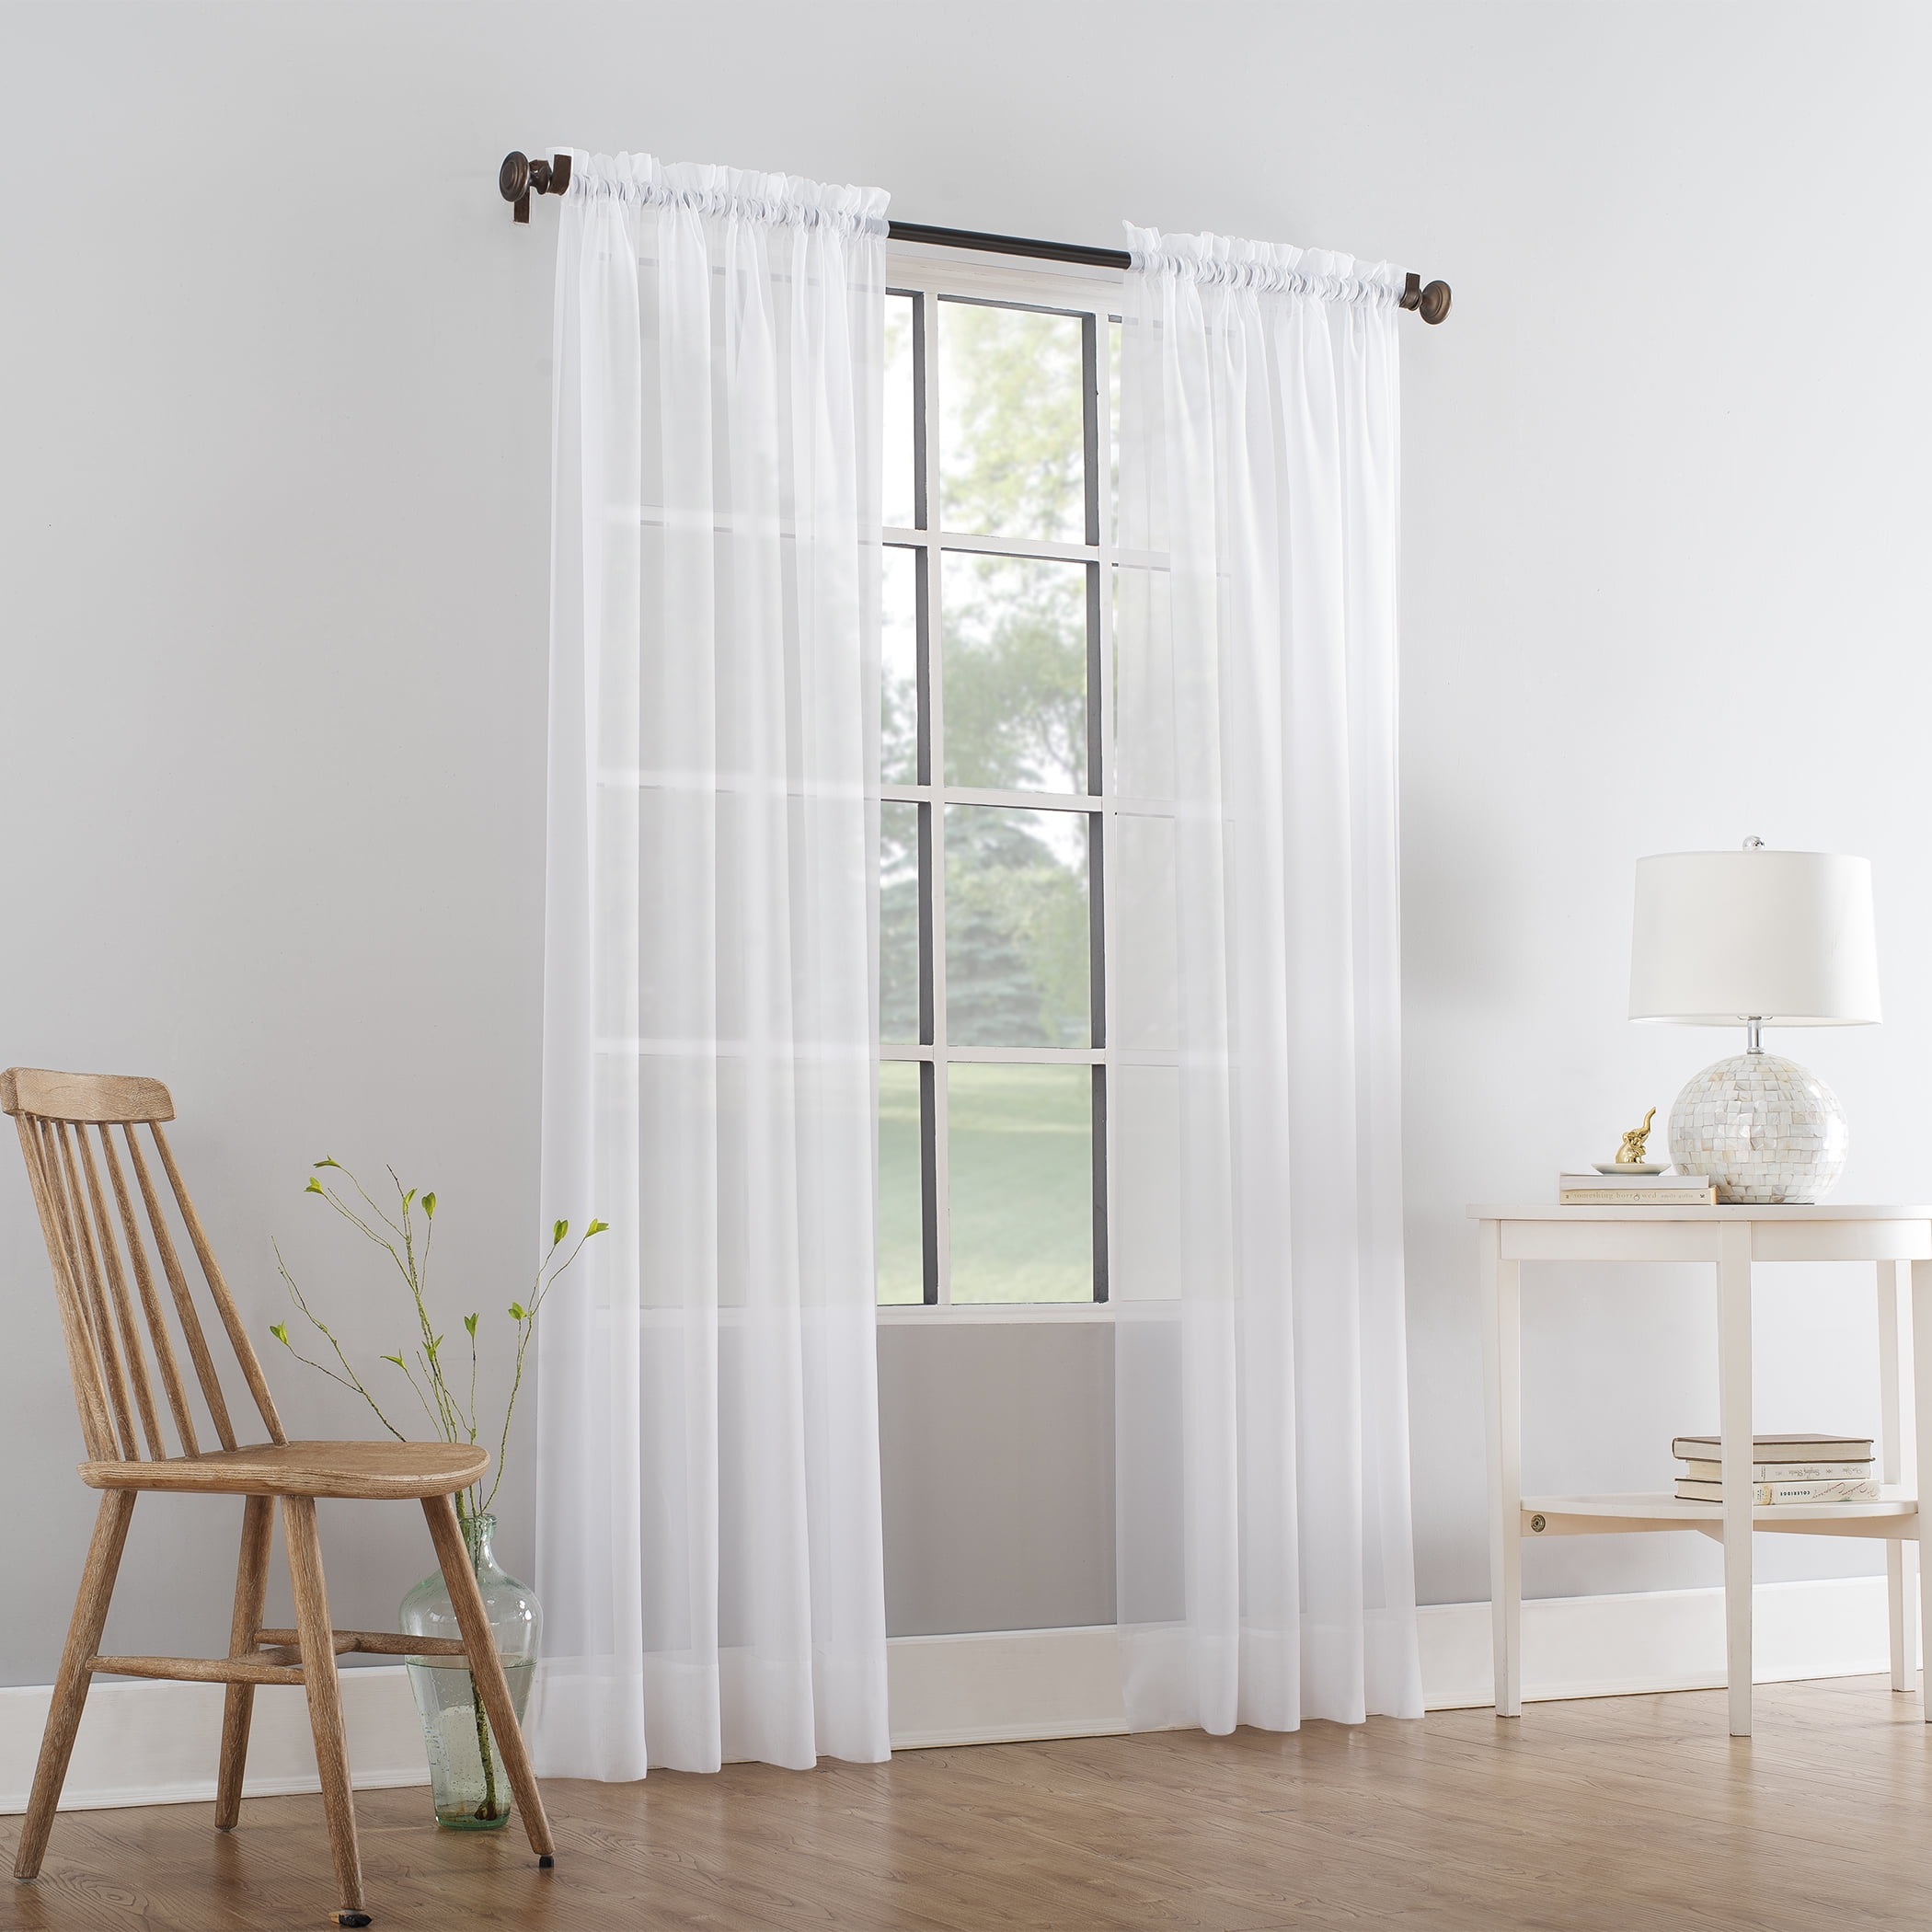 Mainstays Marjorie Sheer Voile Curtain, Single Panel, 59"w x 84"l, White